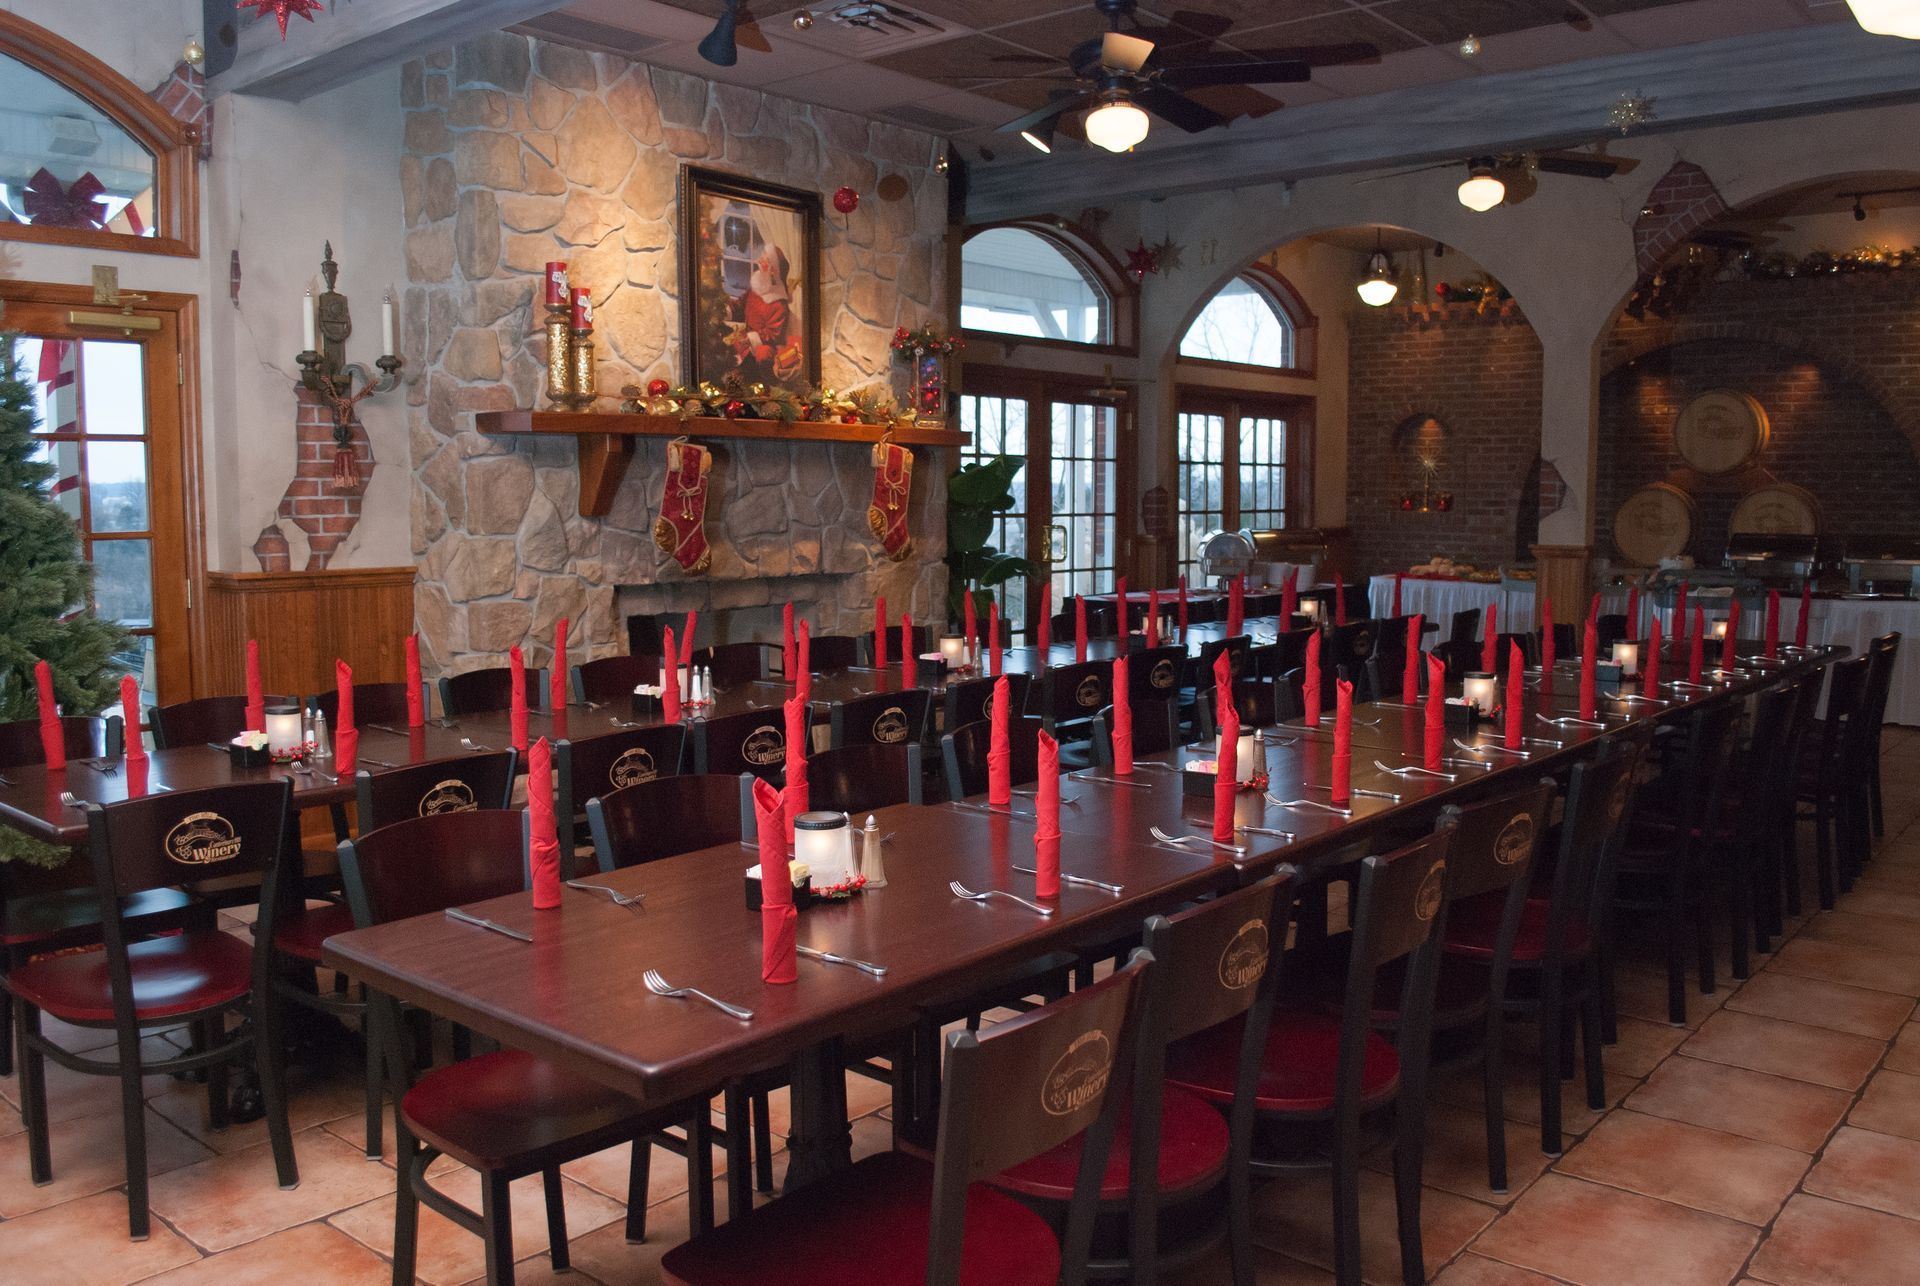 Plan Your Next Party or Event at Canterbury Hill Winery & Restaurant, Mid-Mo’s Event Venue.